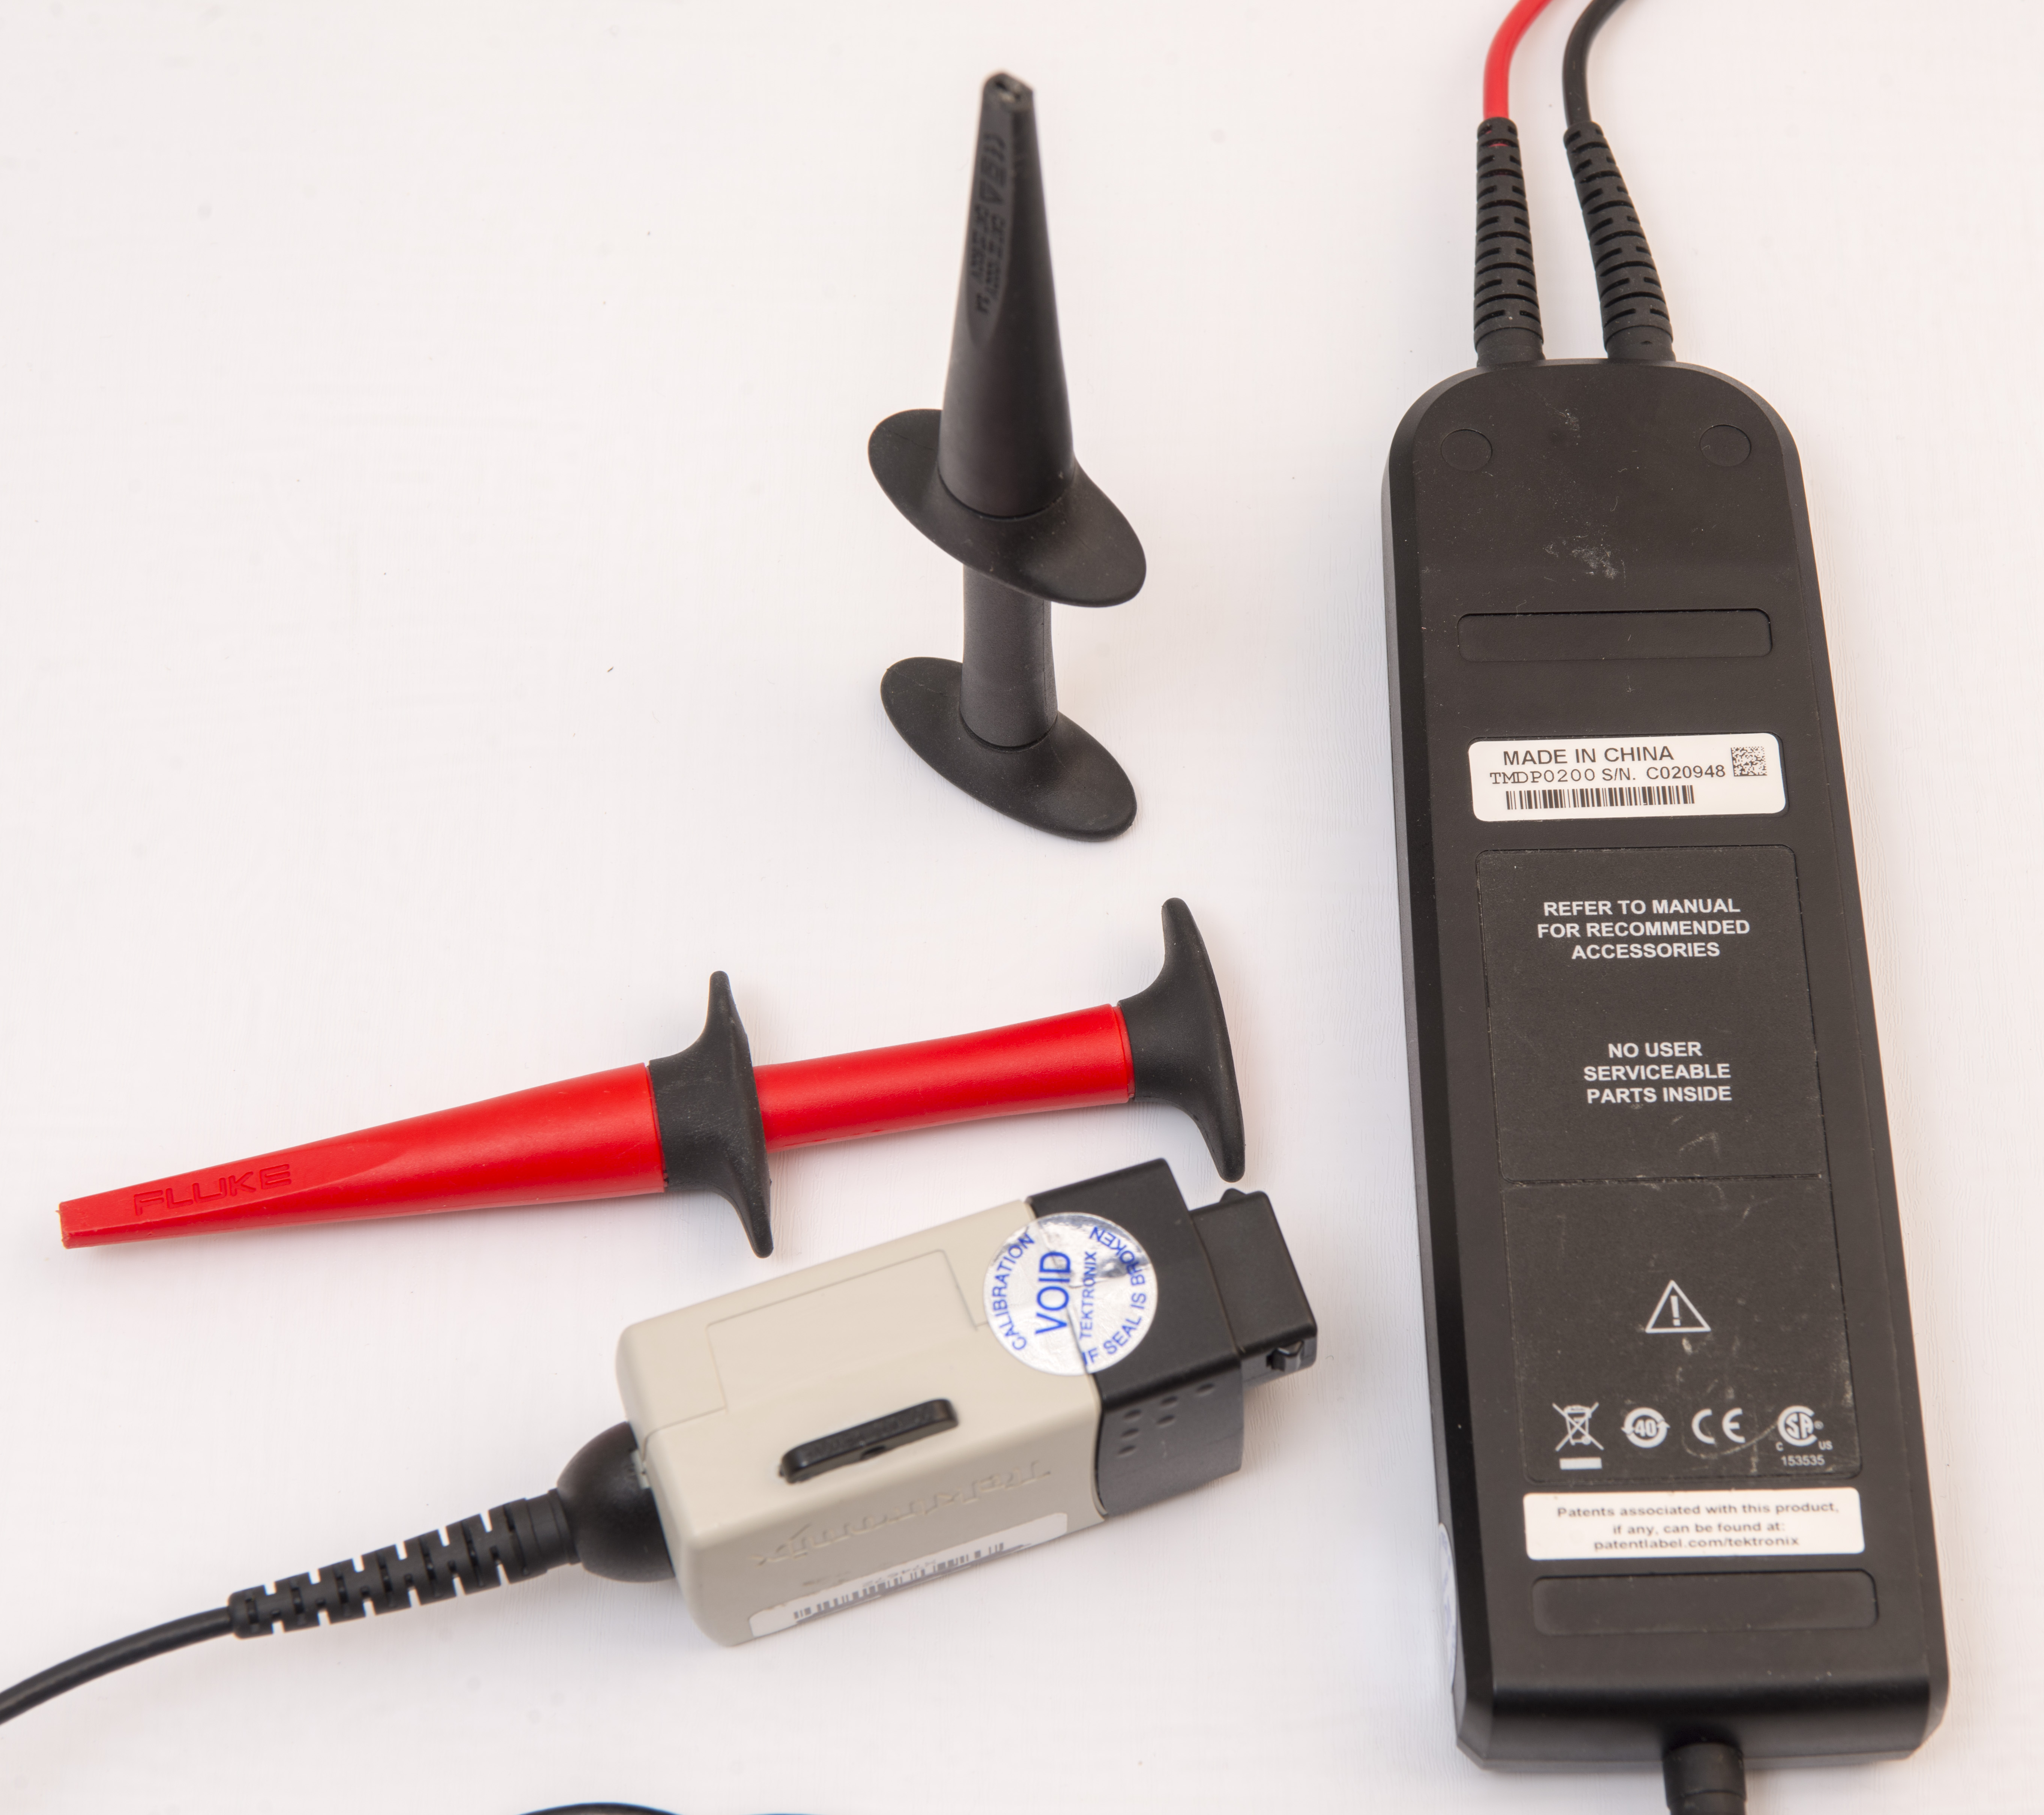 Test Probes Differential Probes 750V 200MHz TMDP0200 